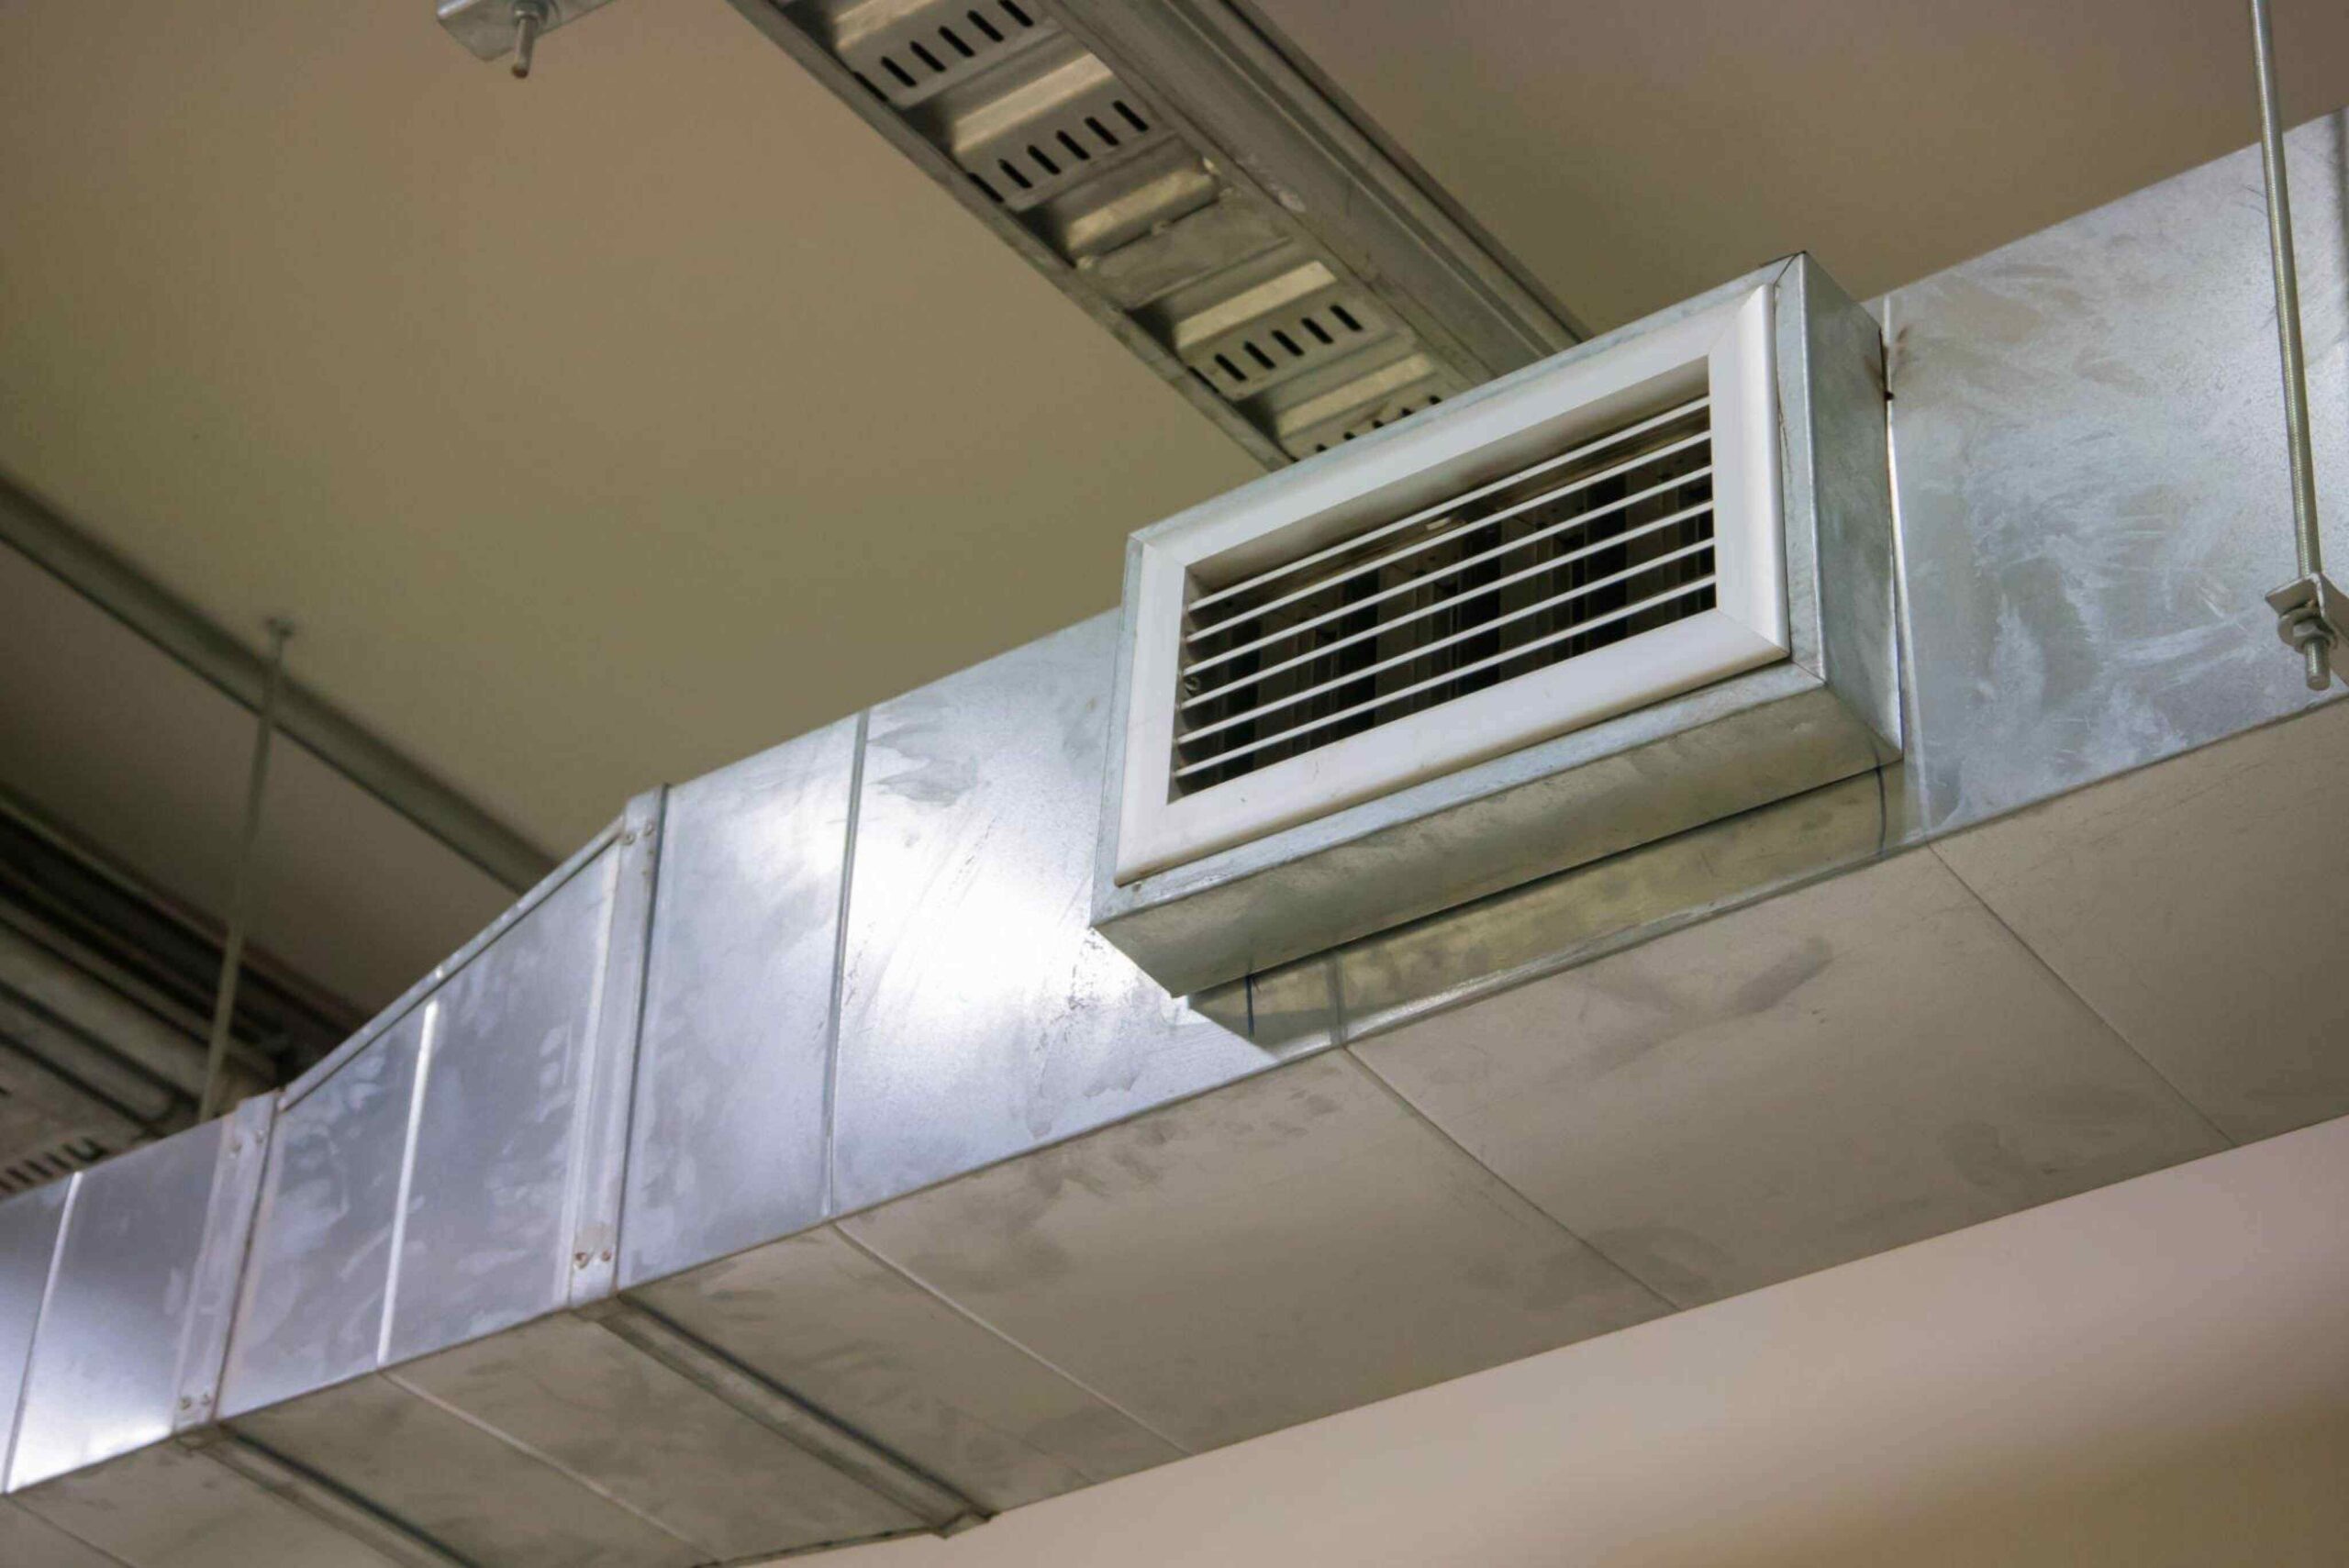 Ducted Heating And Cooling